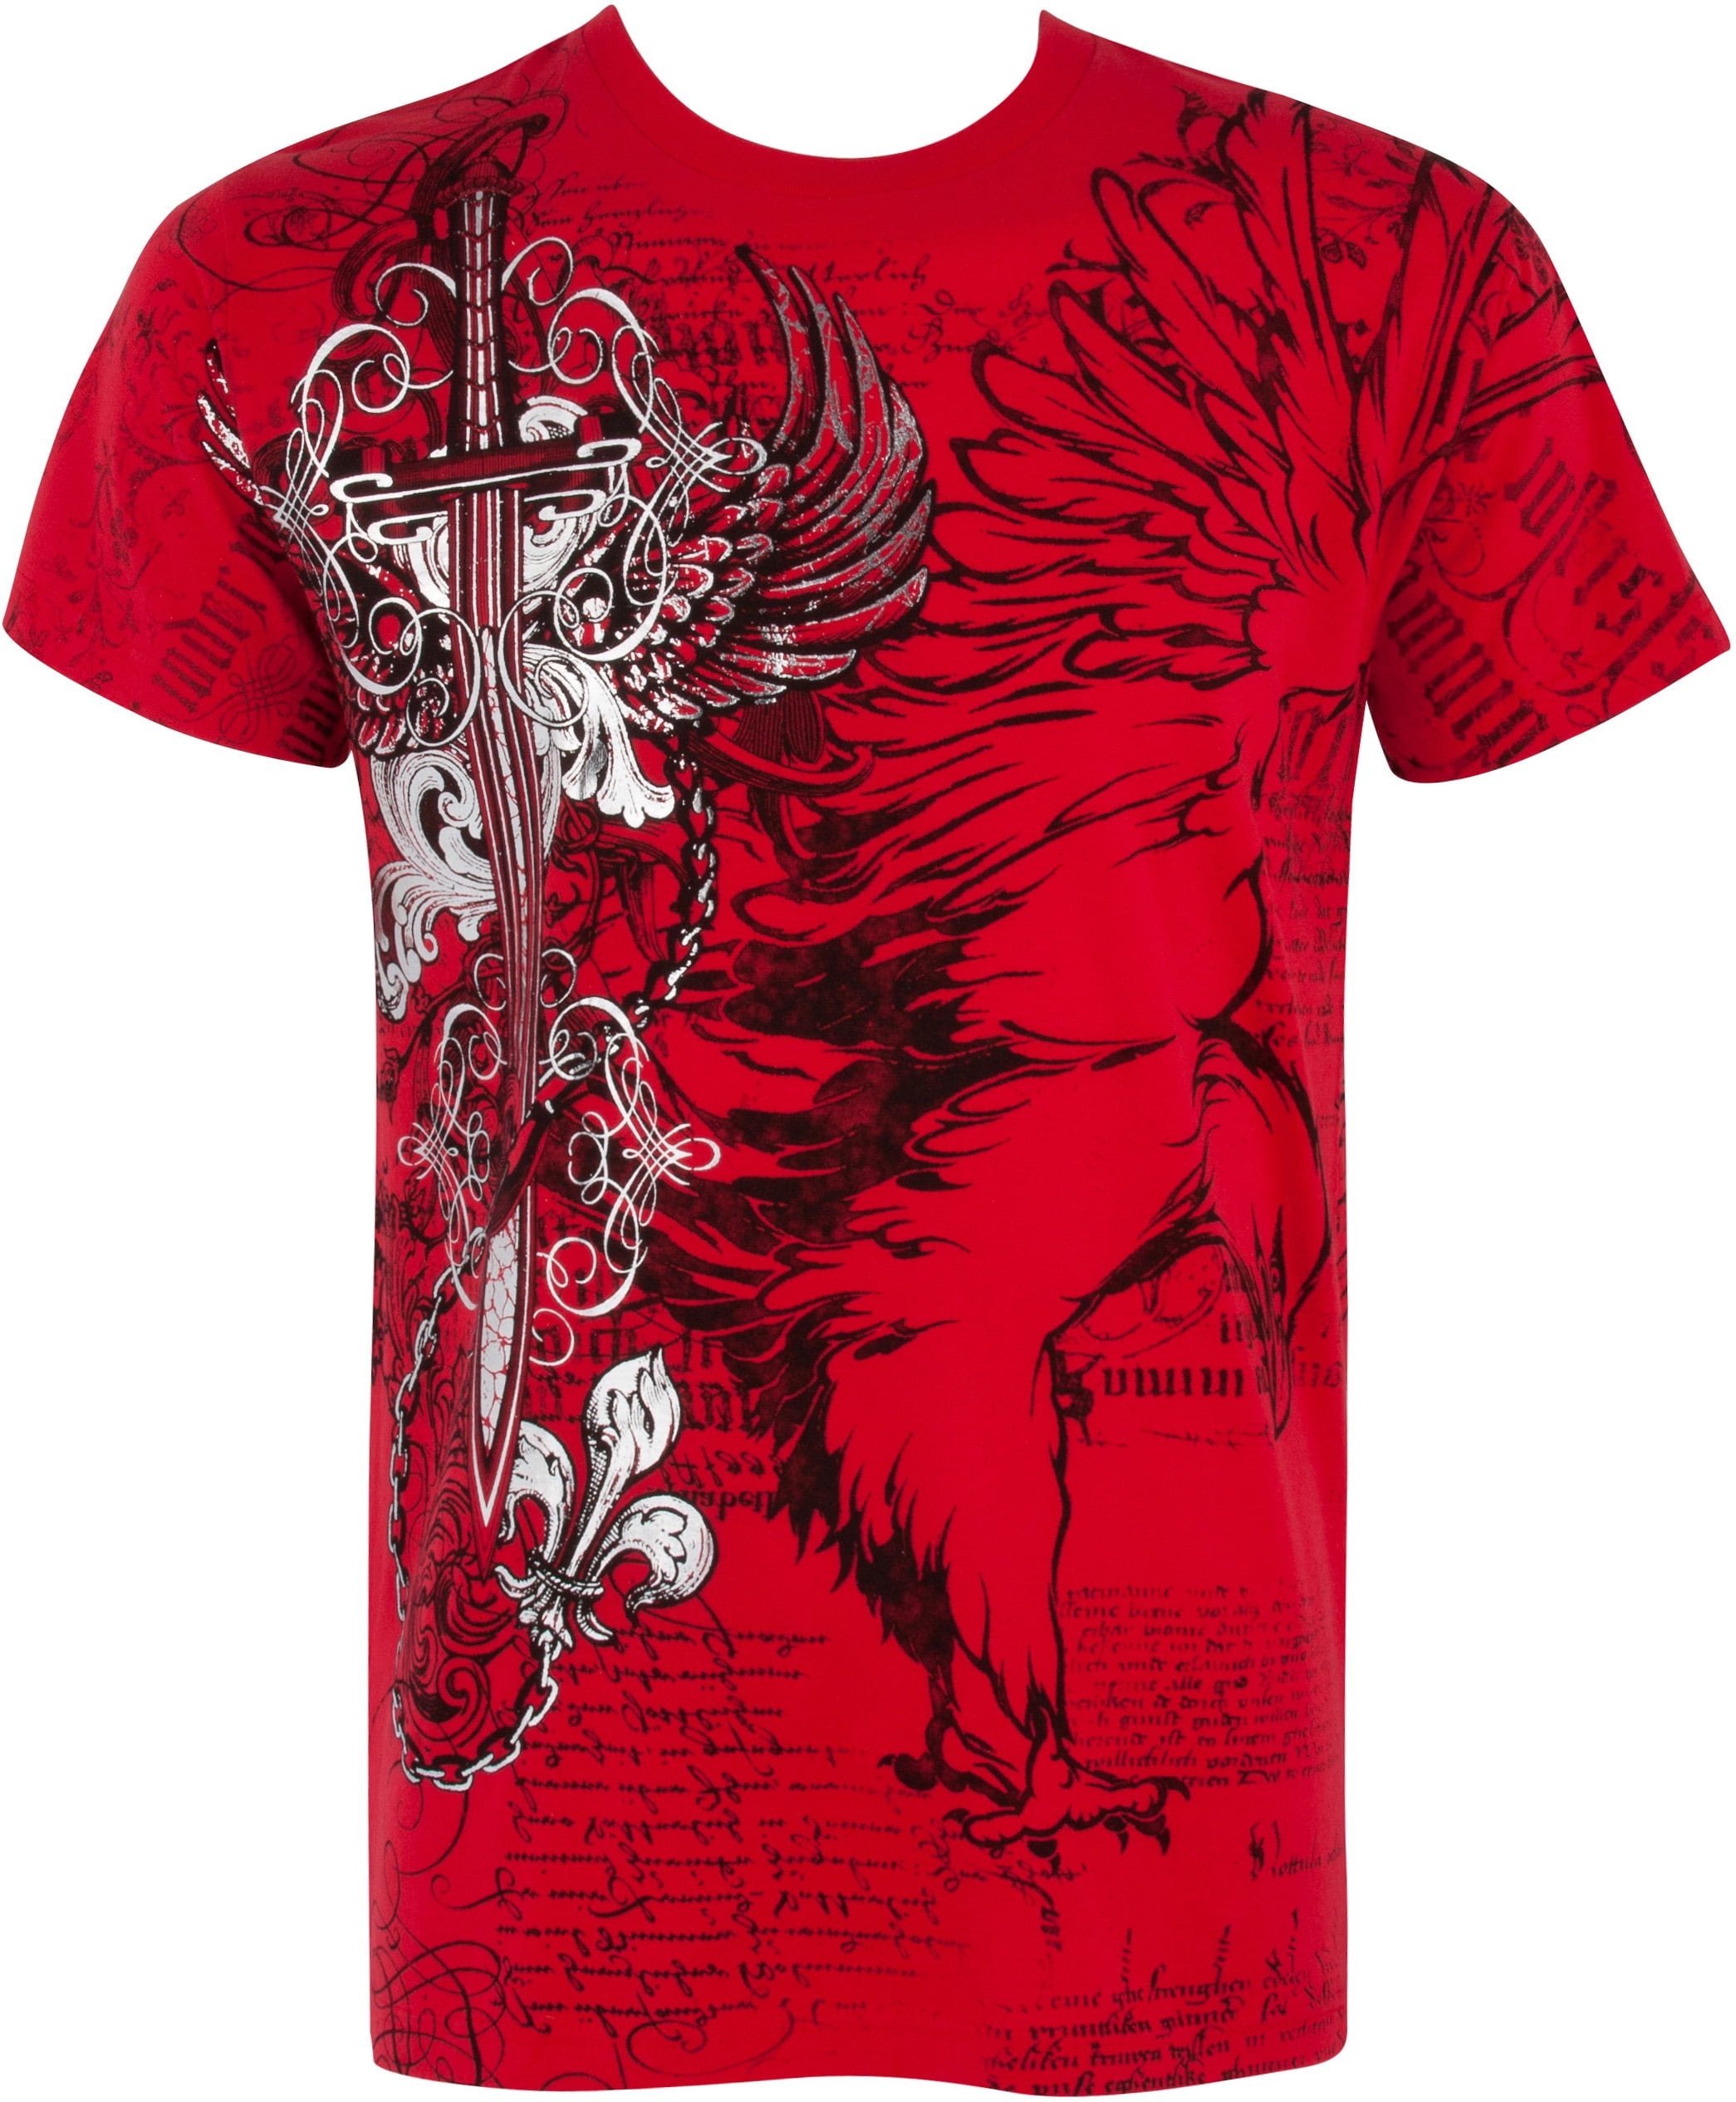 Sakkas Eagle,Sword and Chains Metallic Silver Embossed Cotton Mens T ...